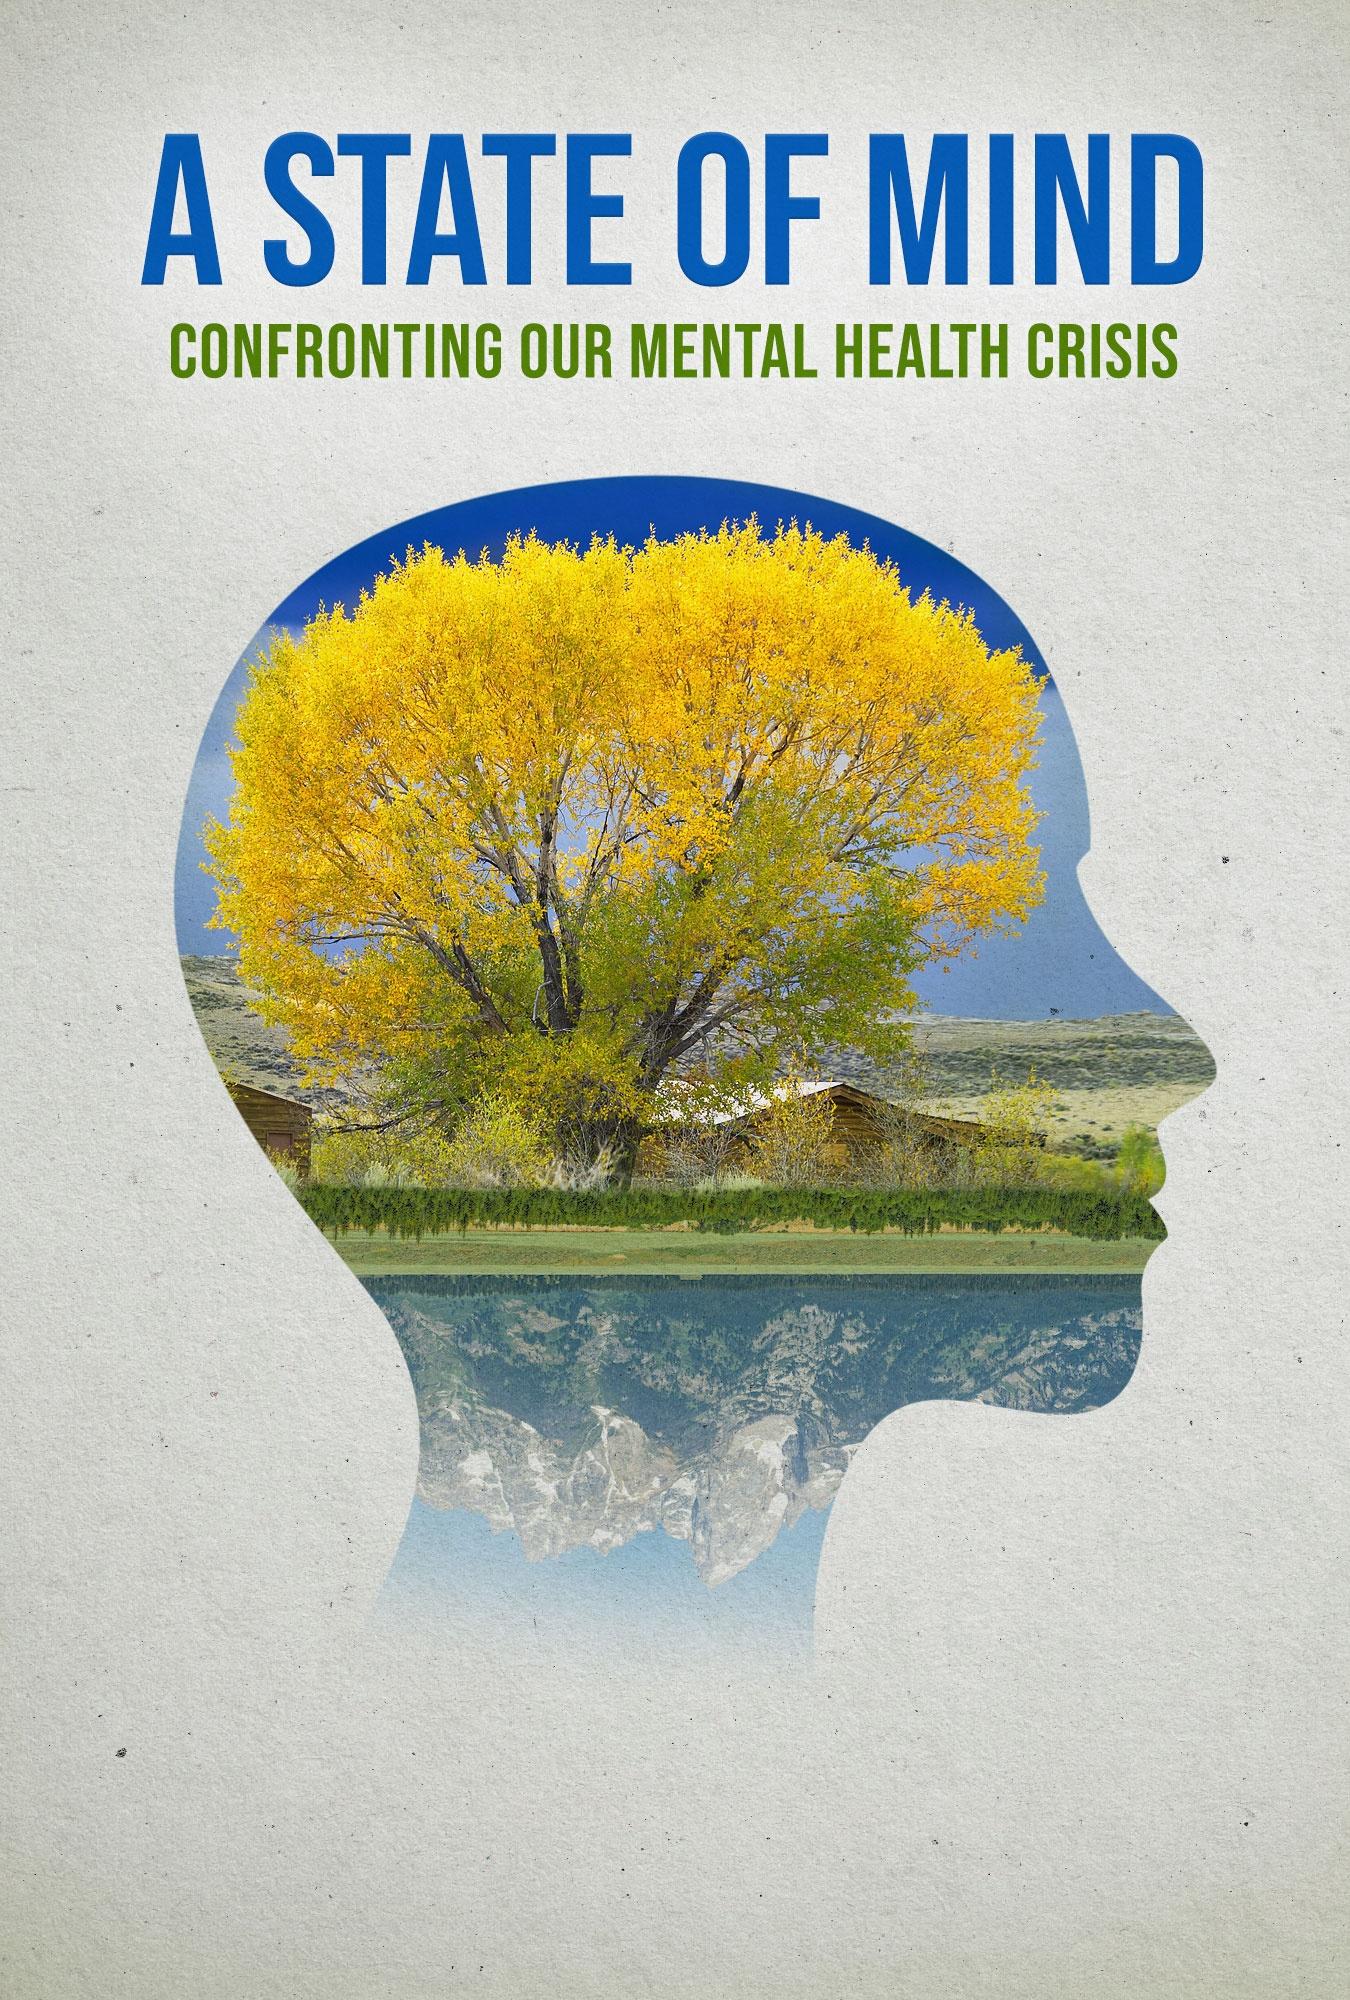 A State of Mind: Confronting Our Mental Health Crisis